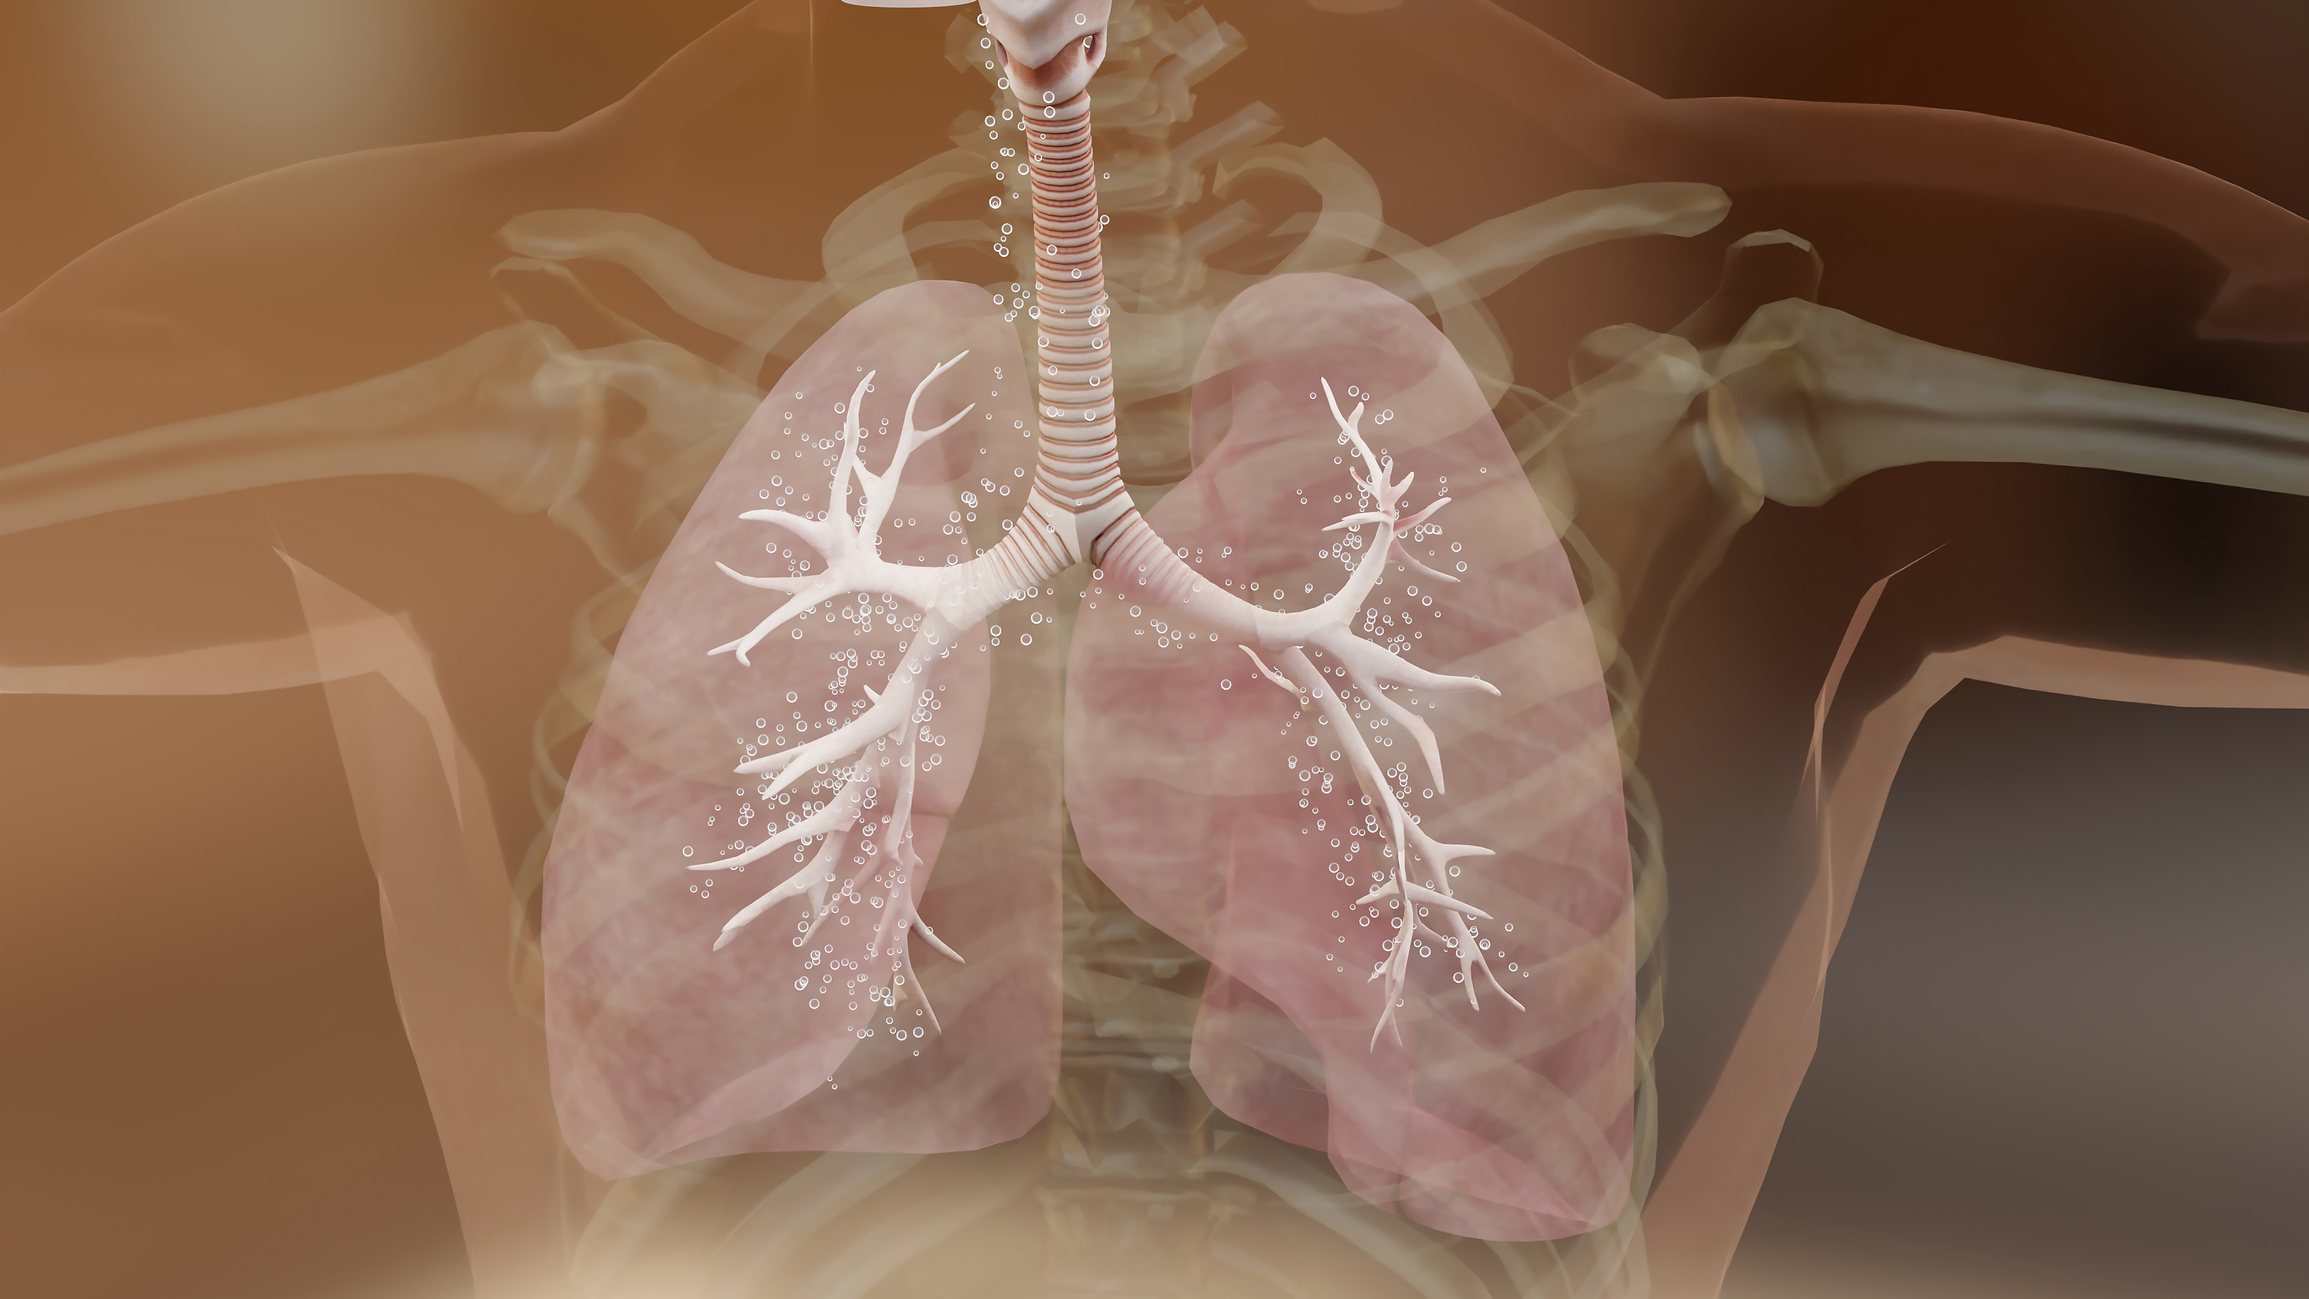 Circulating Tumor DNA IDs Relapse Risk in Early NSCLC